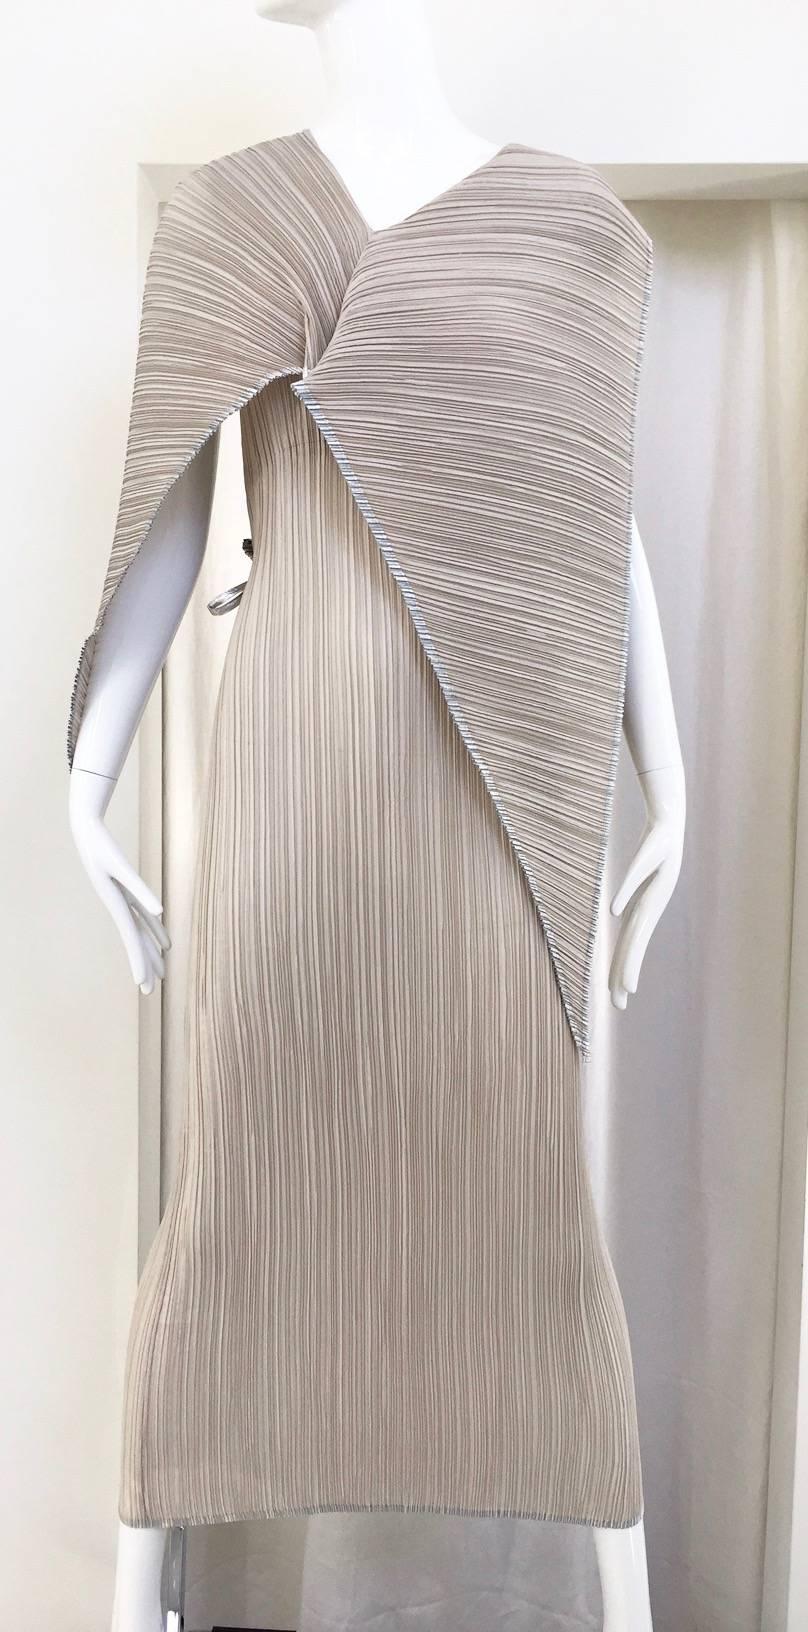 Silver Incredible Issey Miyake light mocha and silver pleat dress.